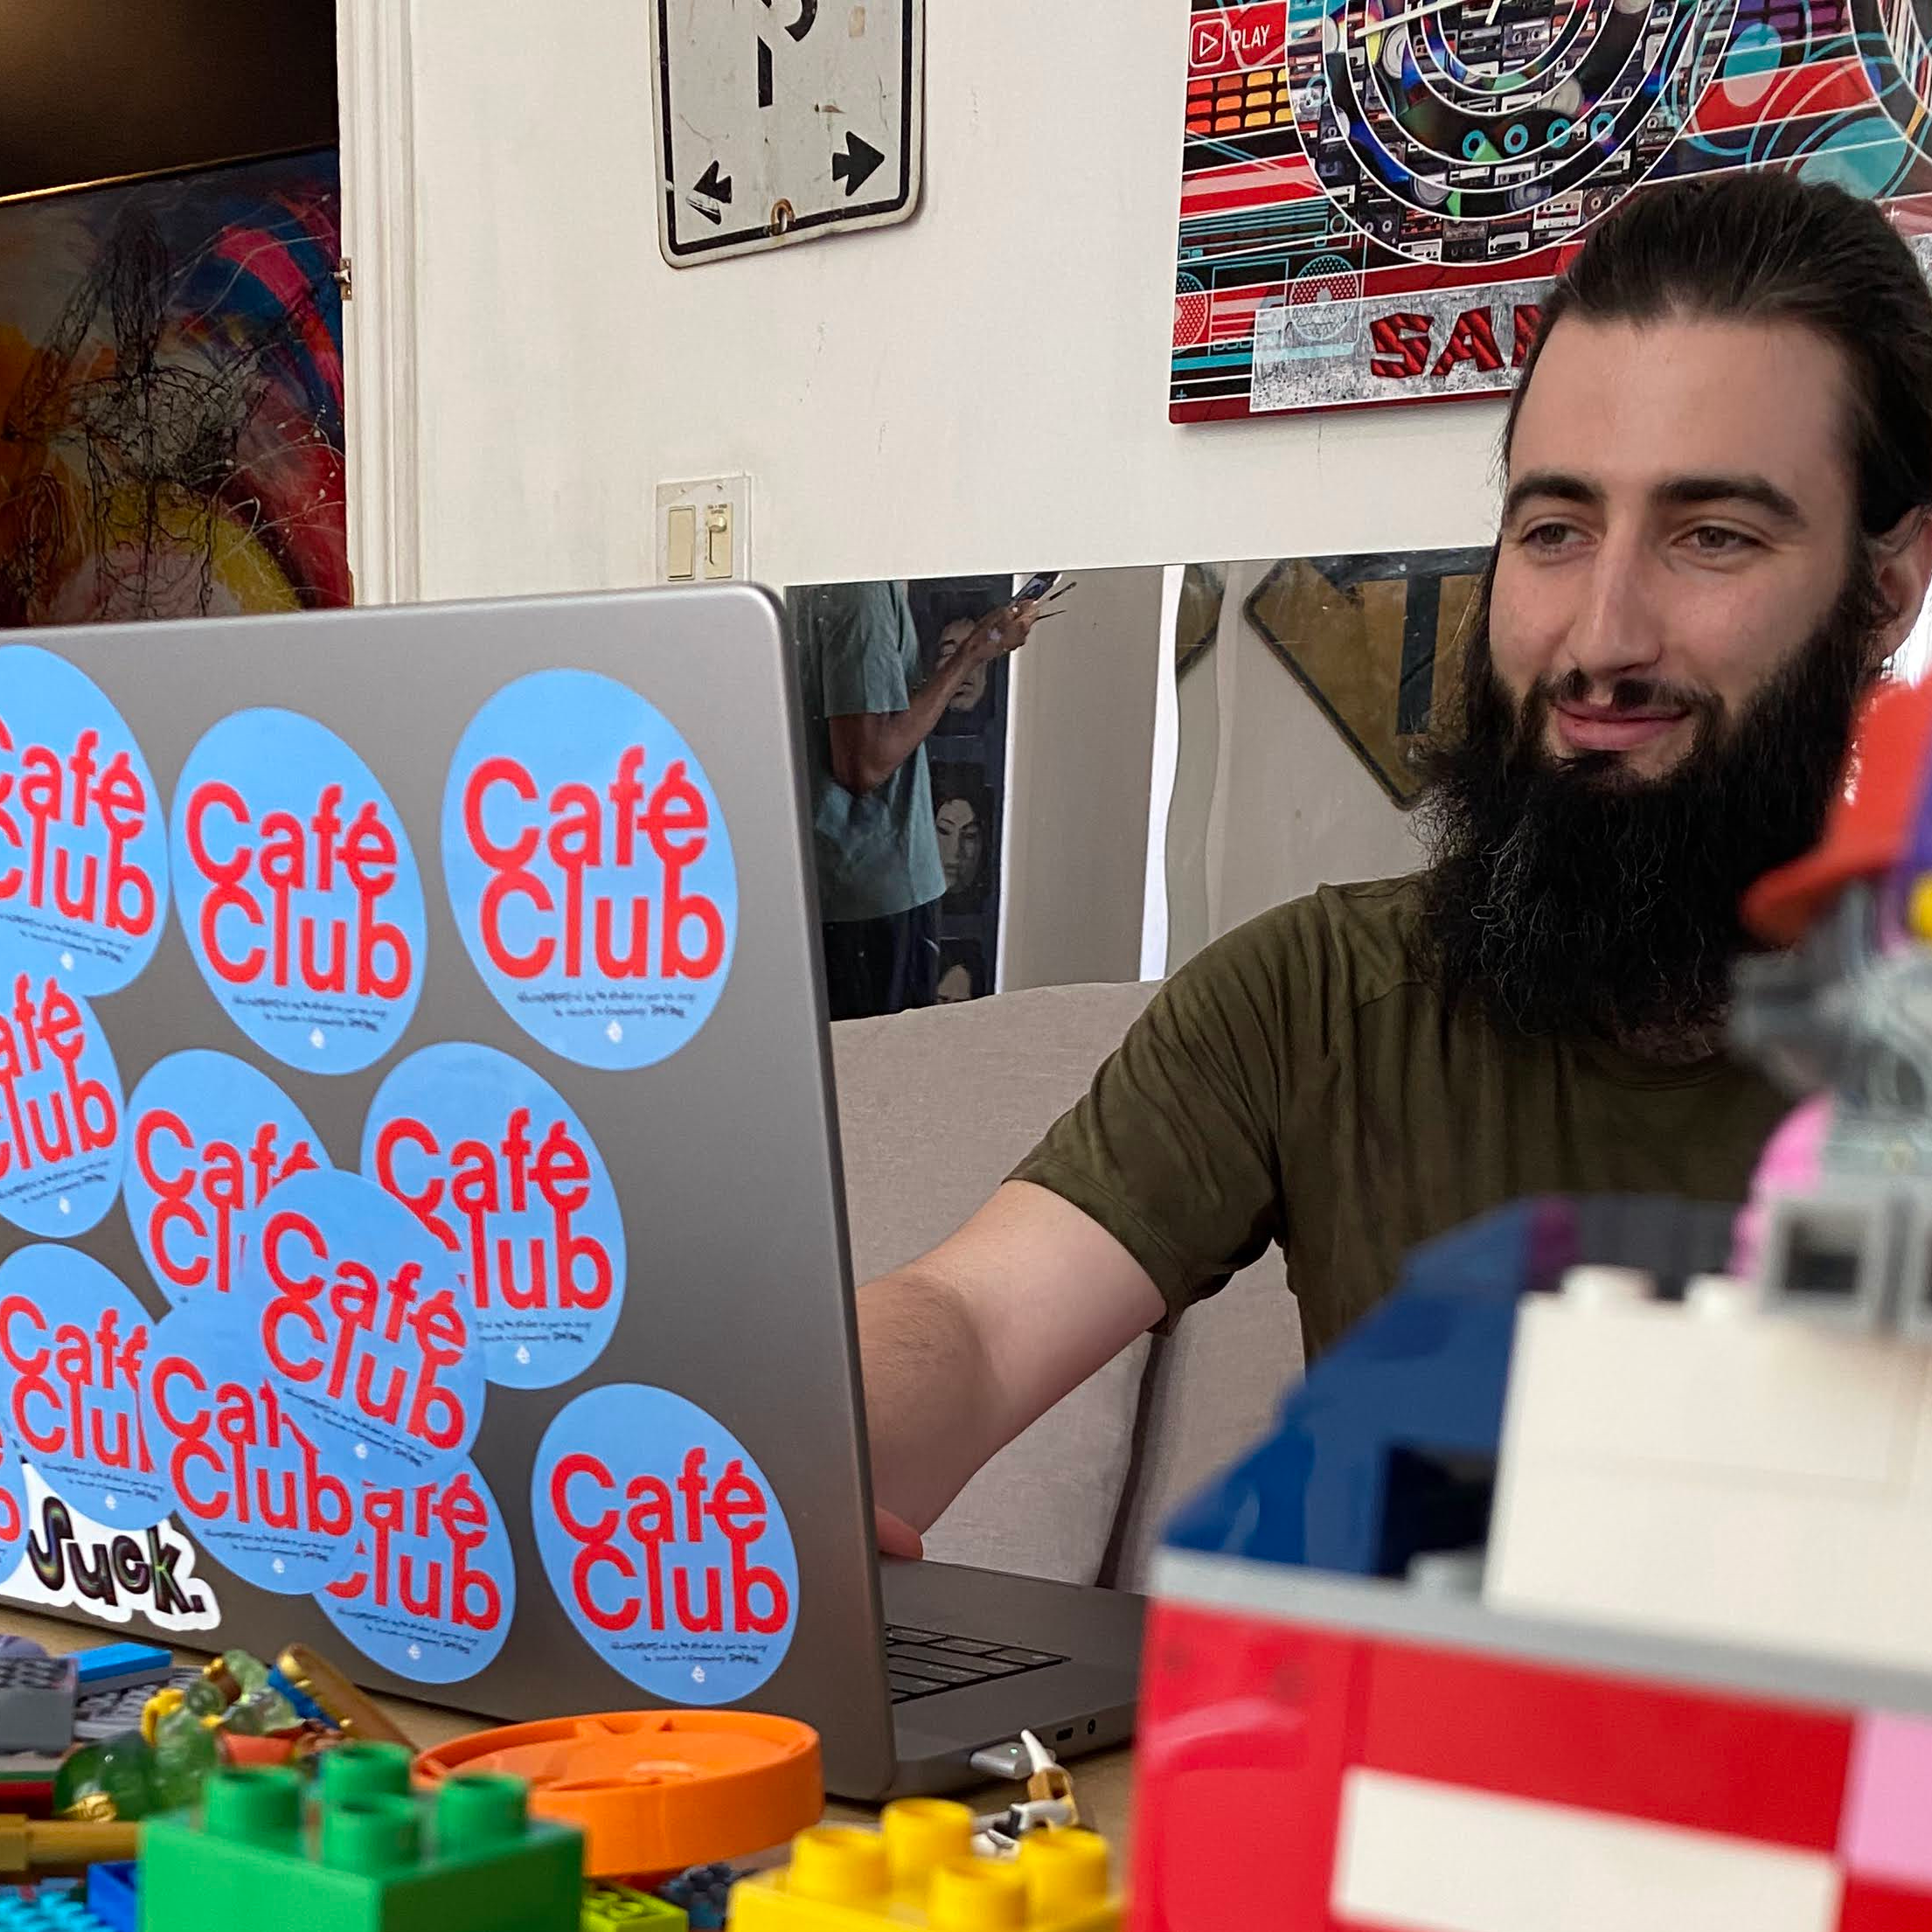 AJ Shoy, Café Club's creator, sits at a table typing on a laptop in the background, as a lego version of the café sits on the table beside him.